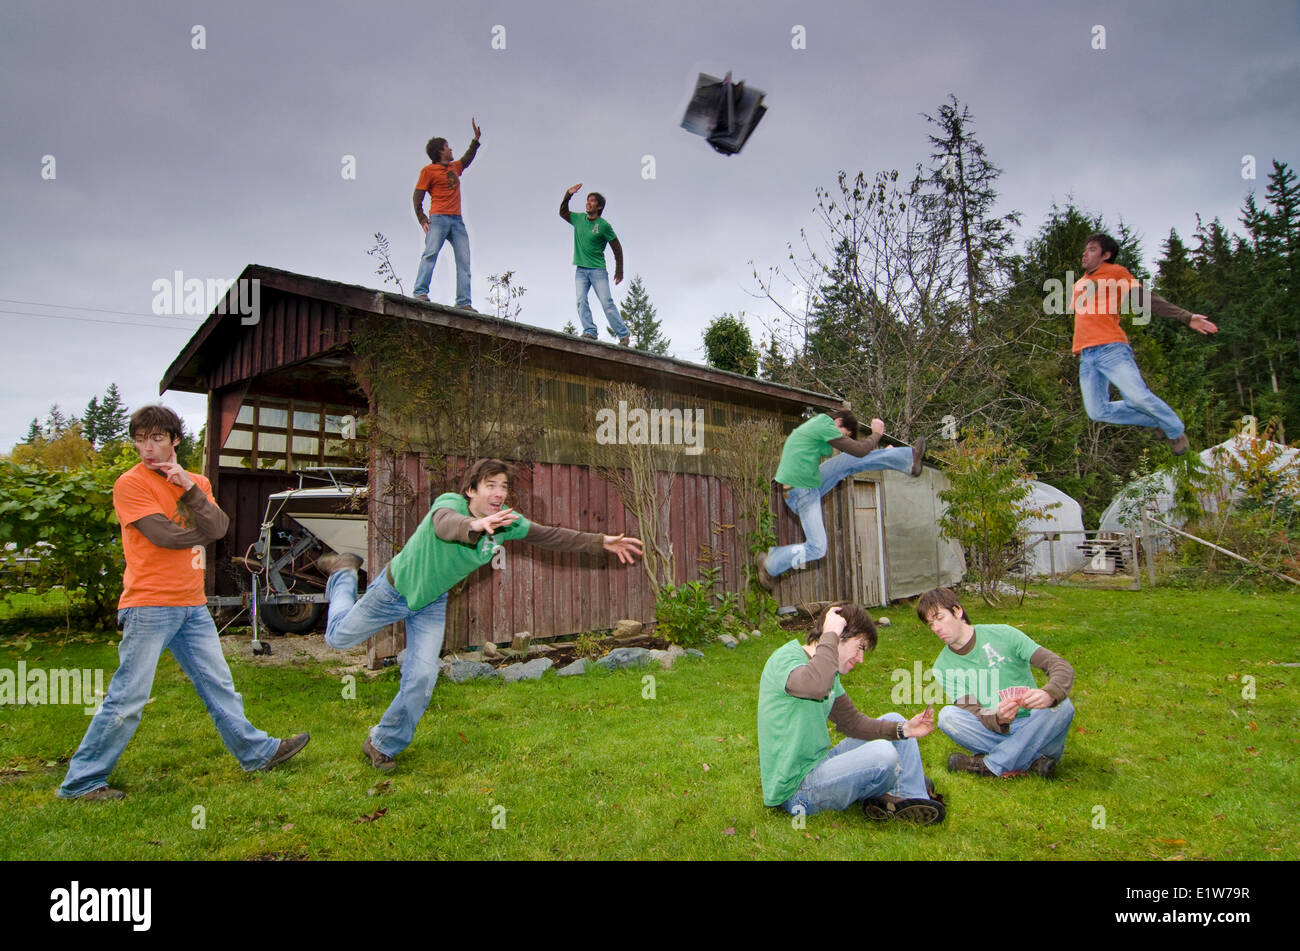 Young man has some multiplicity fun in his back yard in this composite image taken near Powell River, British Columbia, Canada Stock Photo